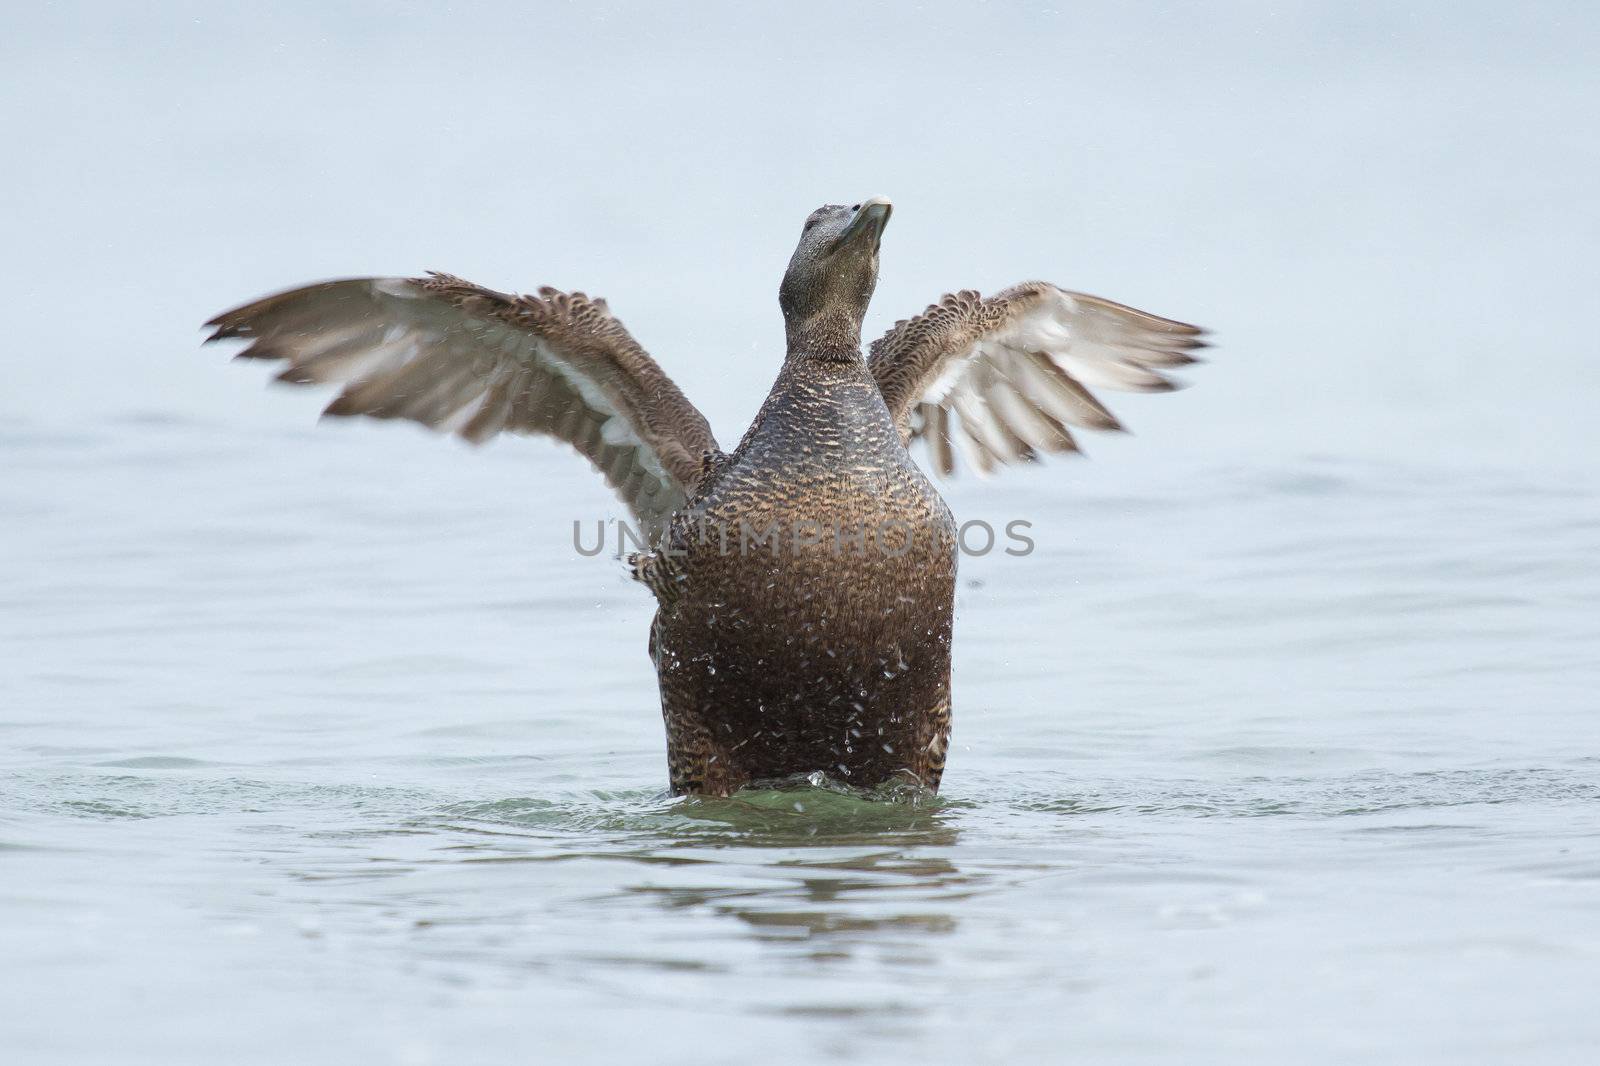 A common eider in the water